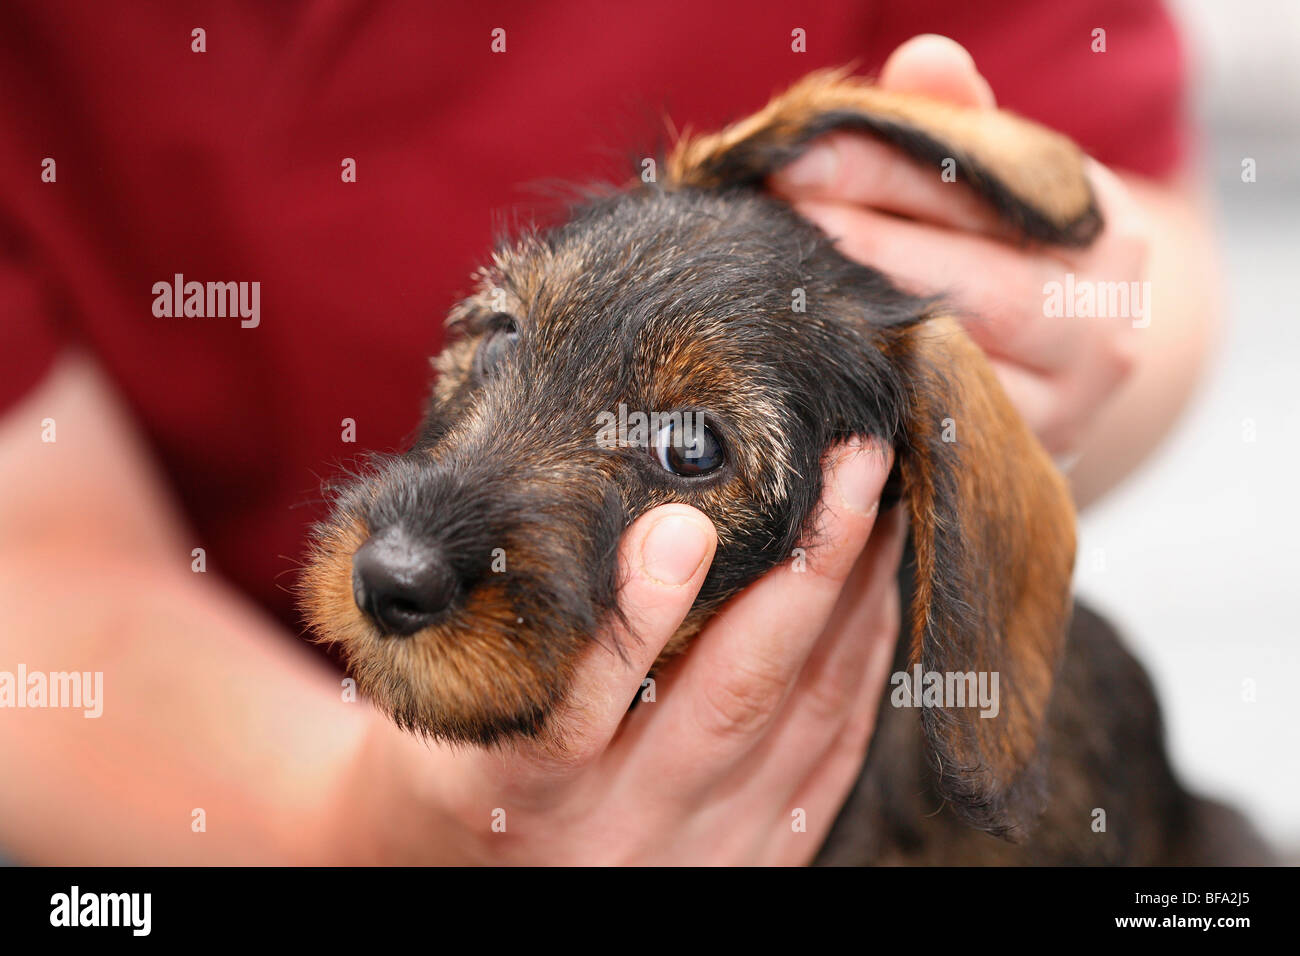 dachshund, sausage dog, domestic dog (Canis lupus f. familiaris), veterinary examins the ears of a nine week old puppy, Germany Stock Photo